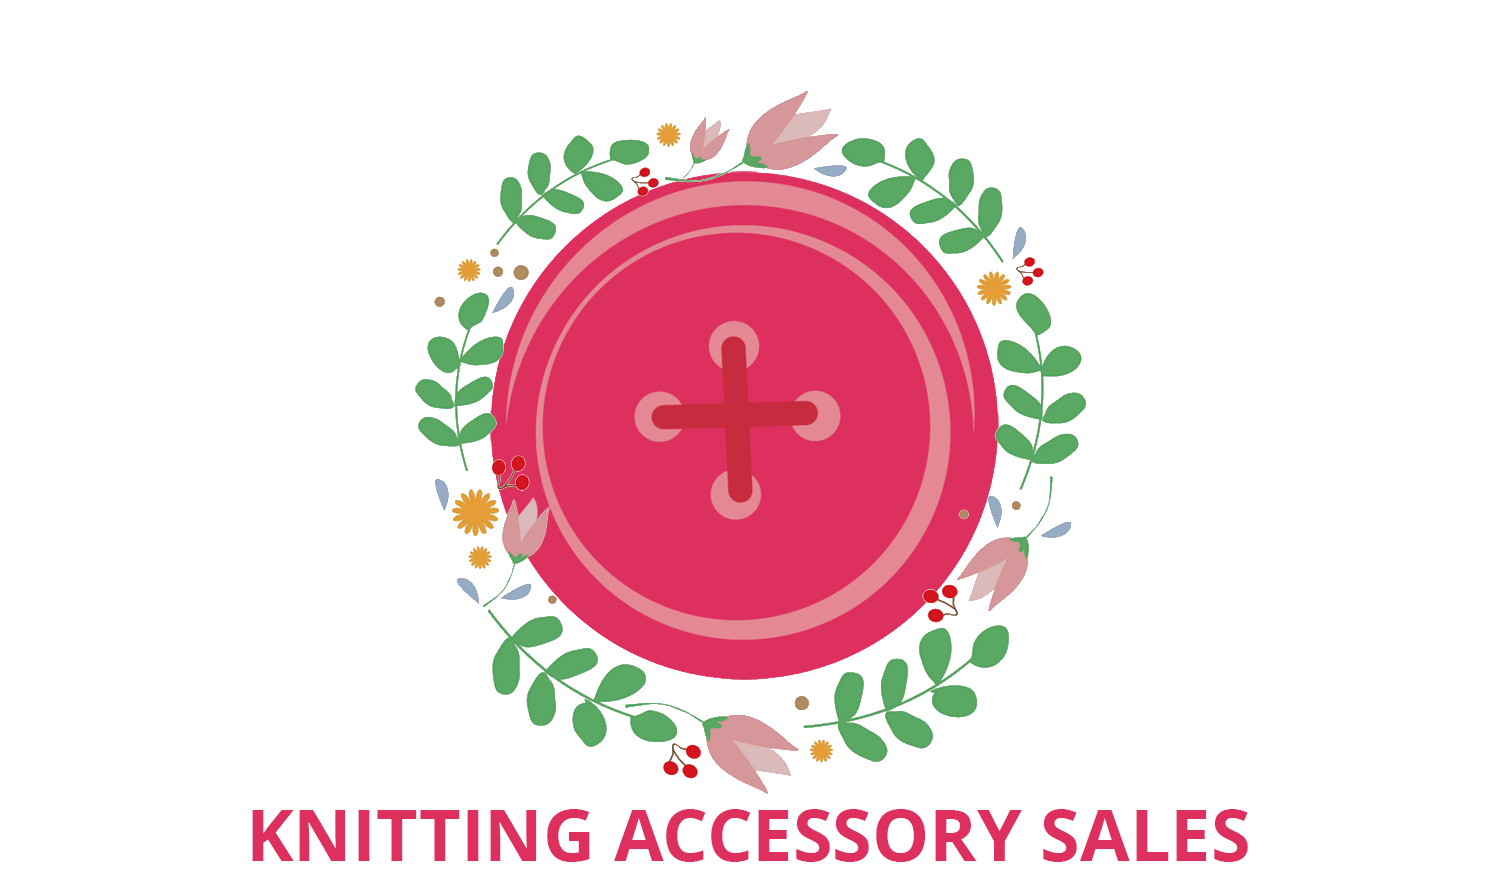 Knitting Accessory Sales